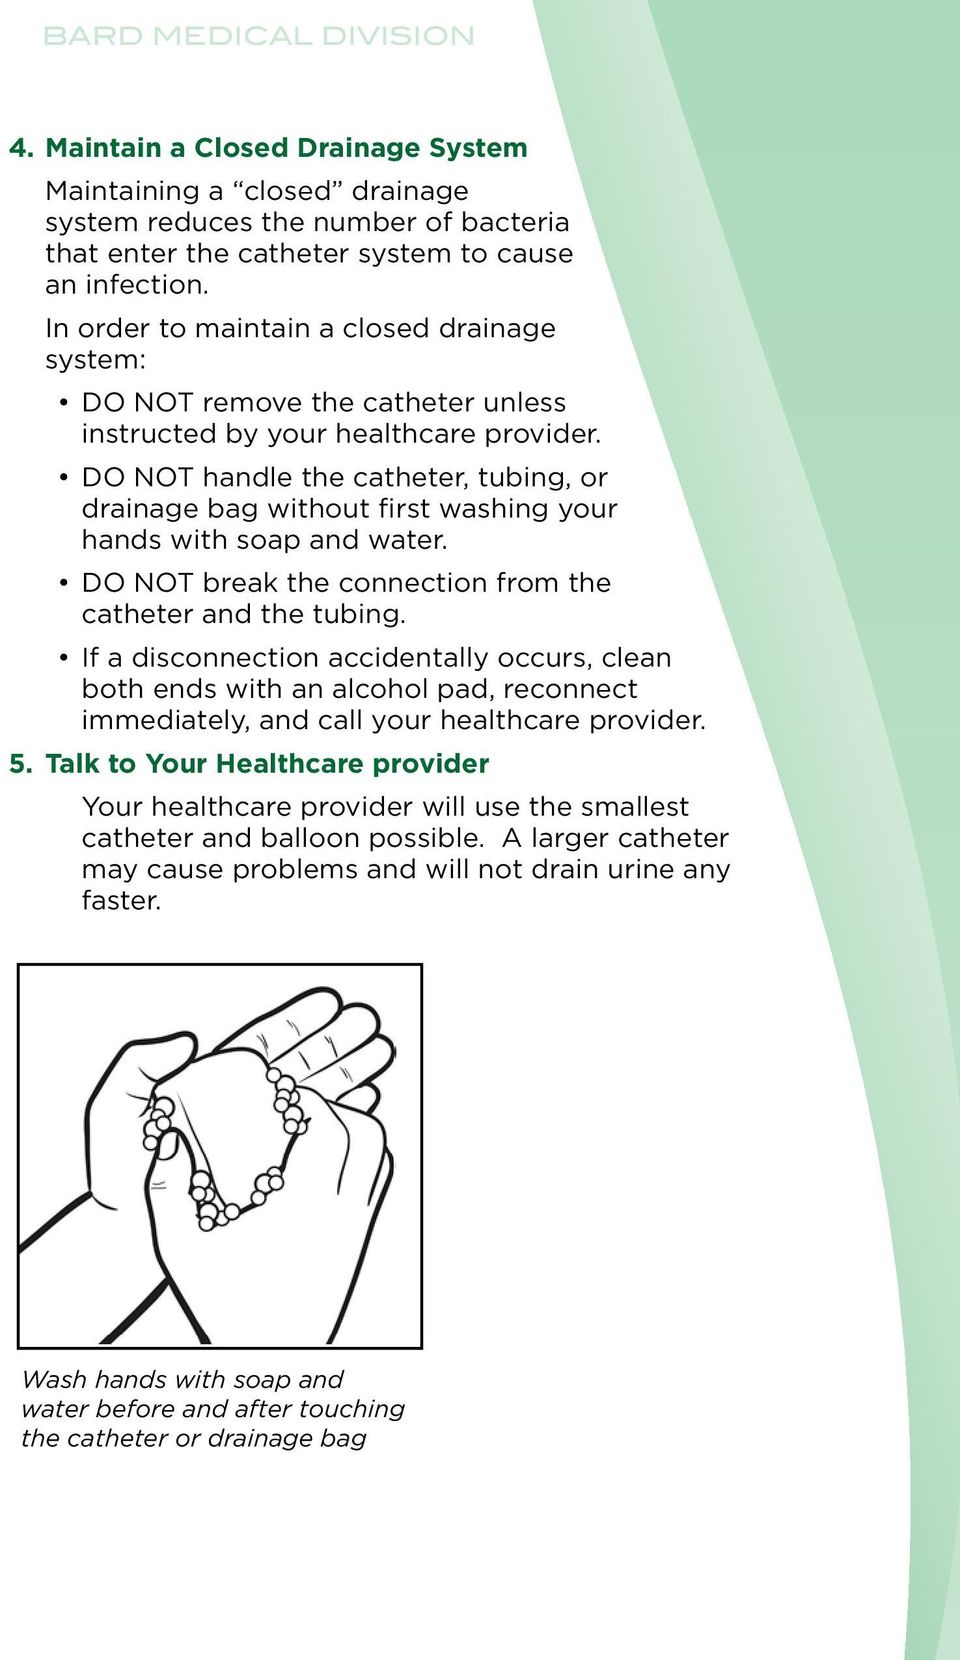 DO NOT handle the catheter, tubing, or drainage bag without first washing your hands with soap and water. DO NOT break the connection from the catheter and the tubing.